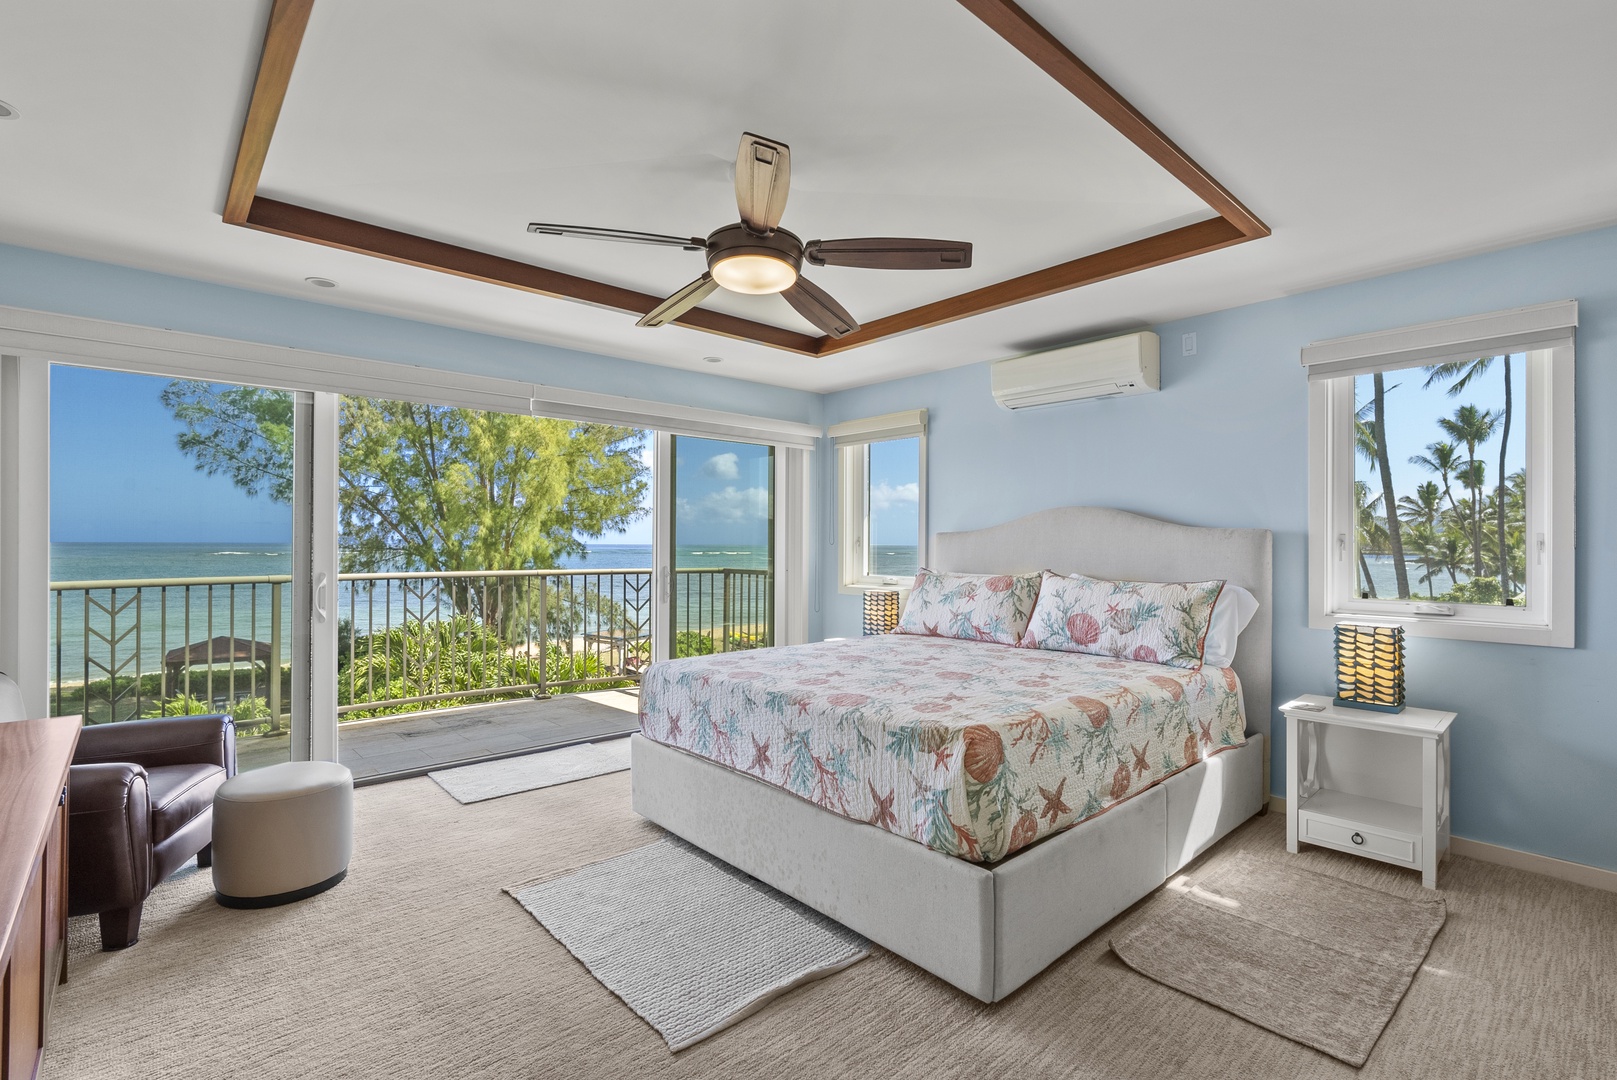 Waialua Vacation Rentals, Kala'iku Estate - Main bedroom with King Bed and ensuite bathroom plus a private Ocean view balcony